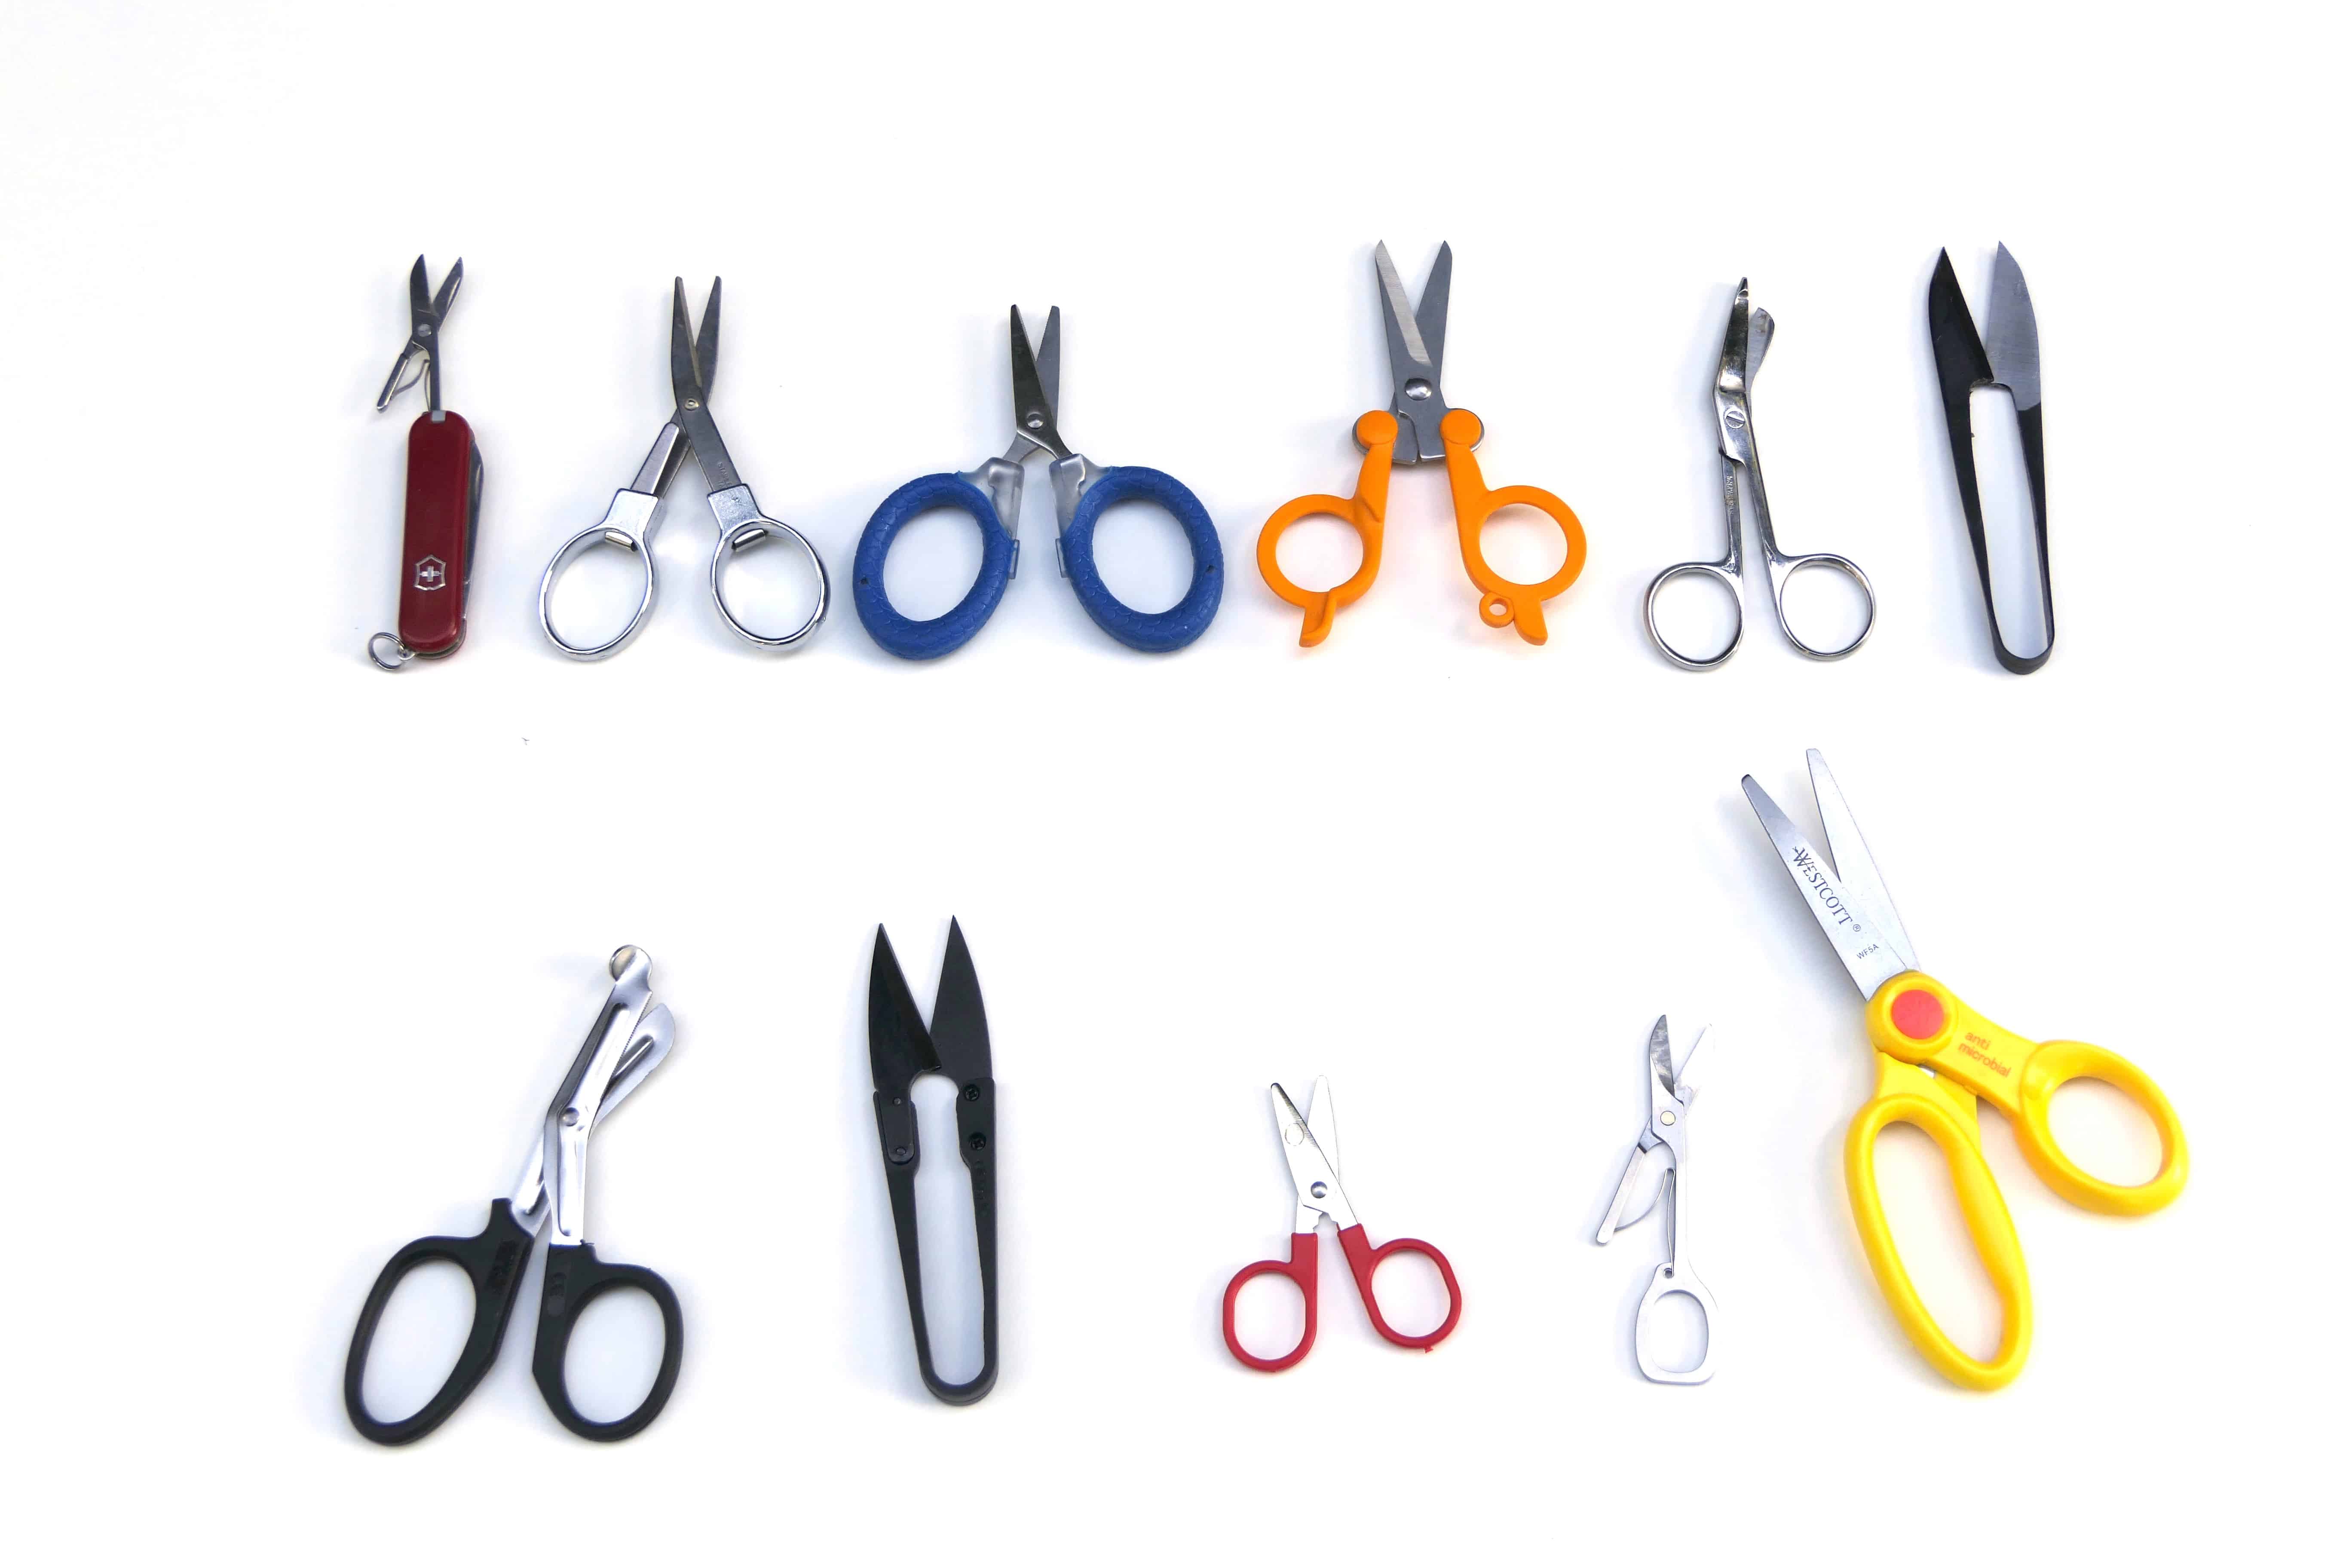 All scissors tested on white background